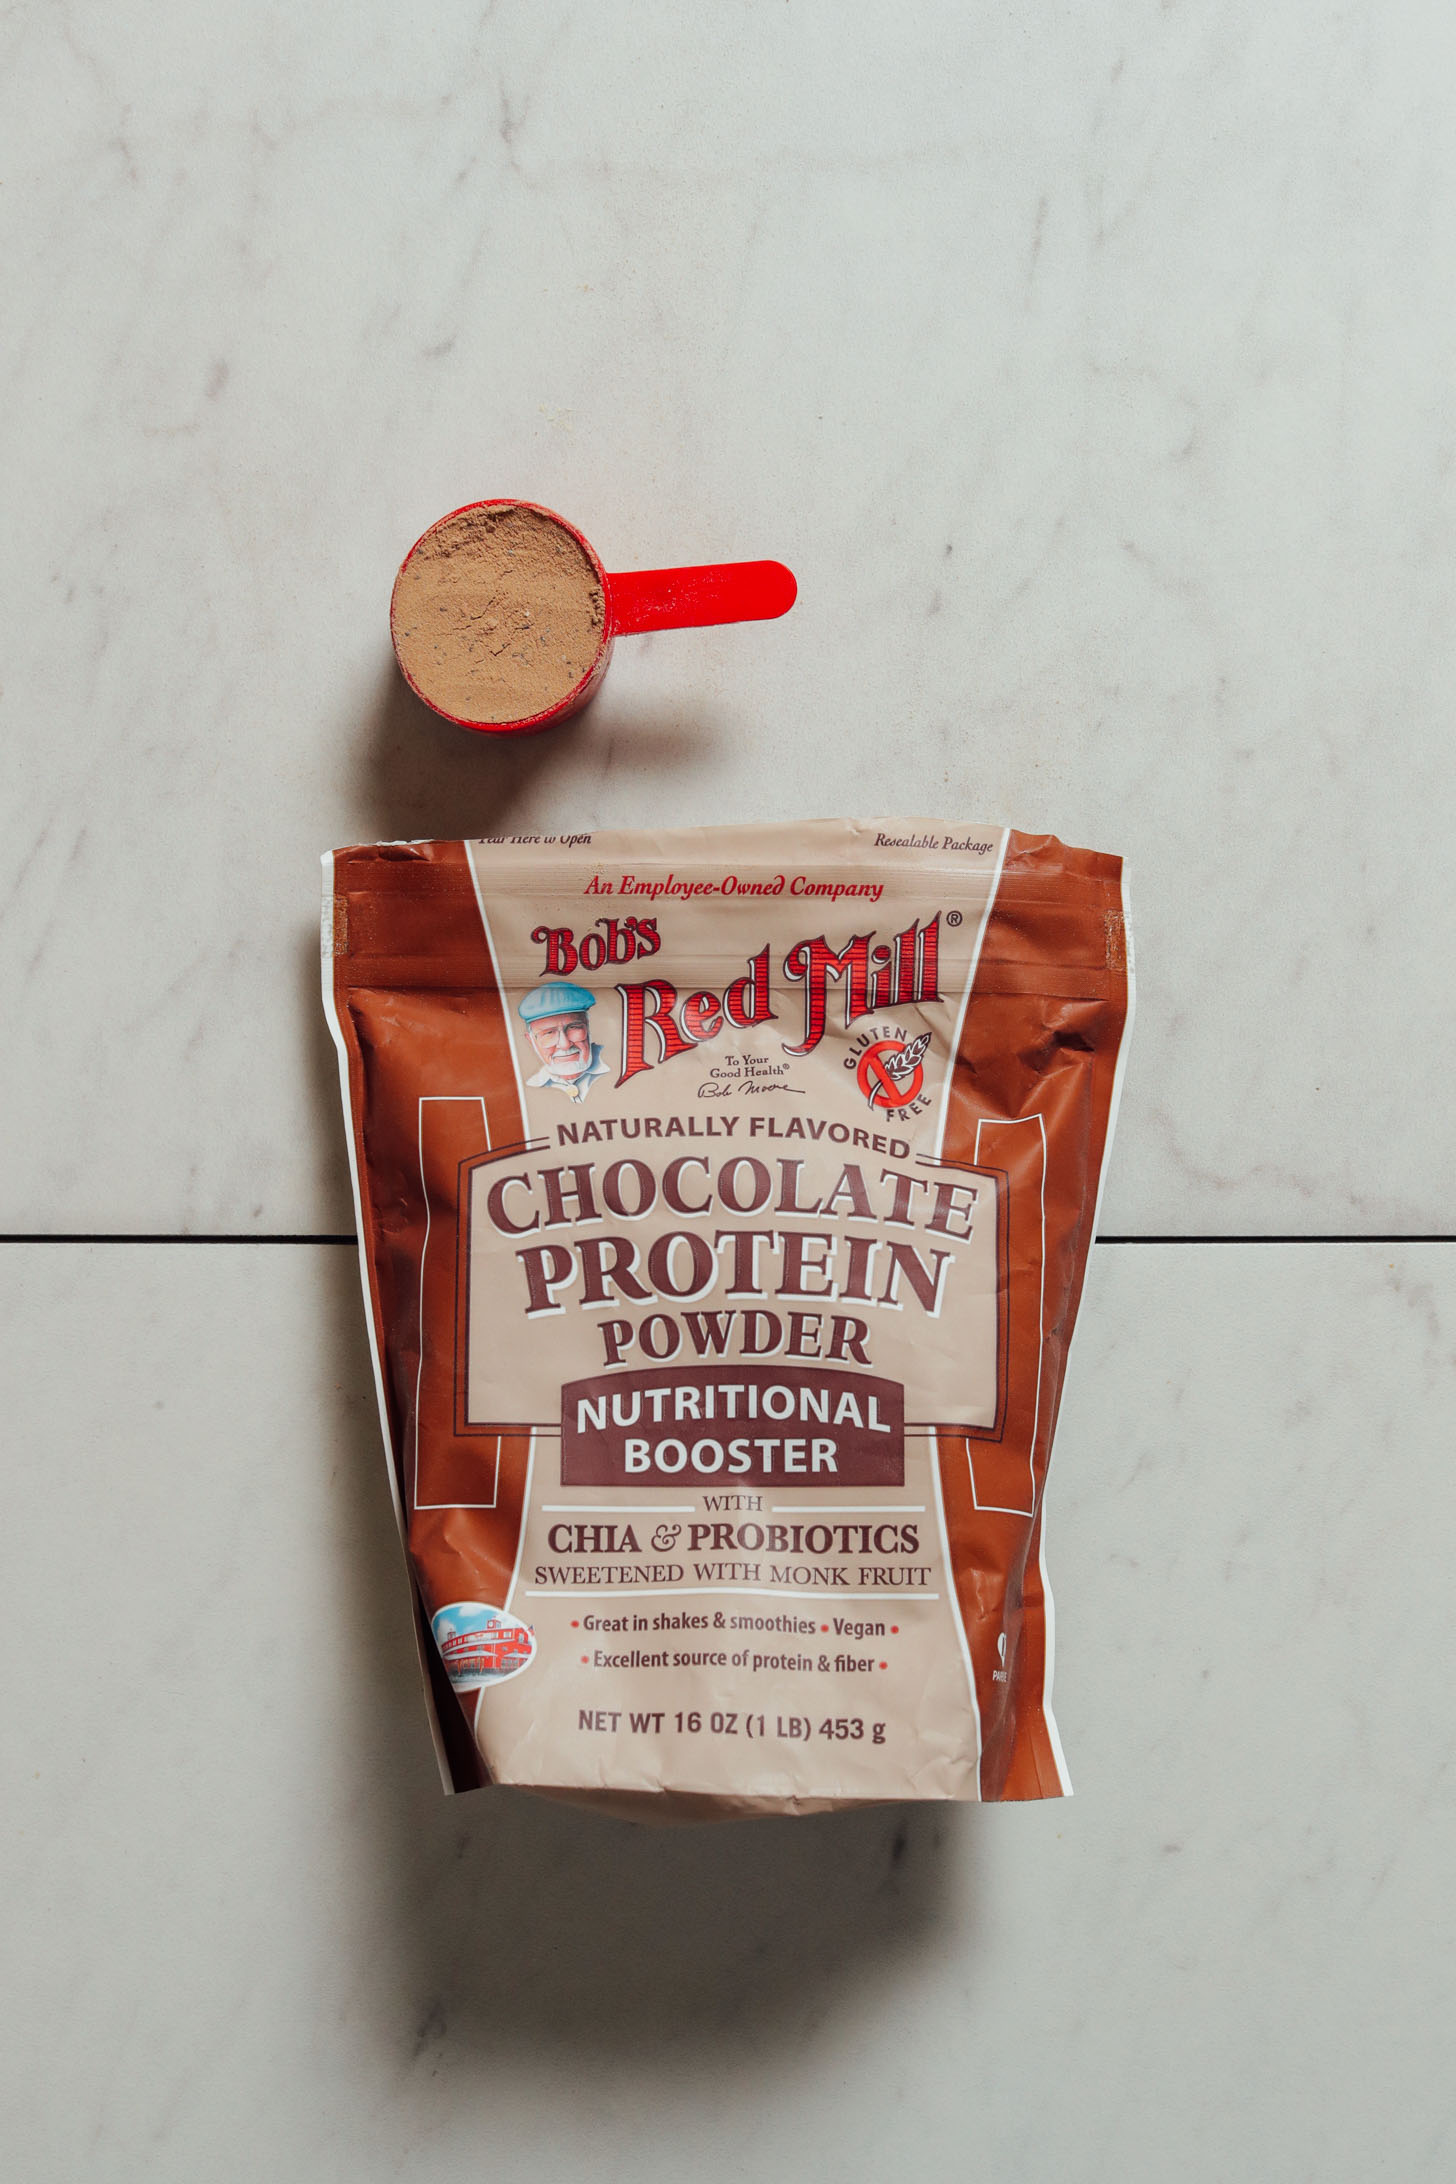 Pouch of Bob's Red Mill Chocolate Protein Powder for our plant-based review